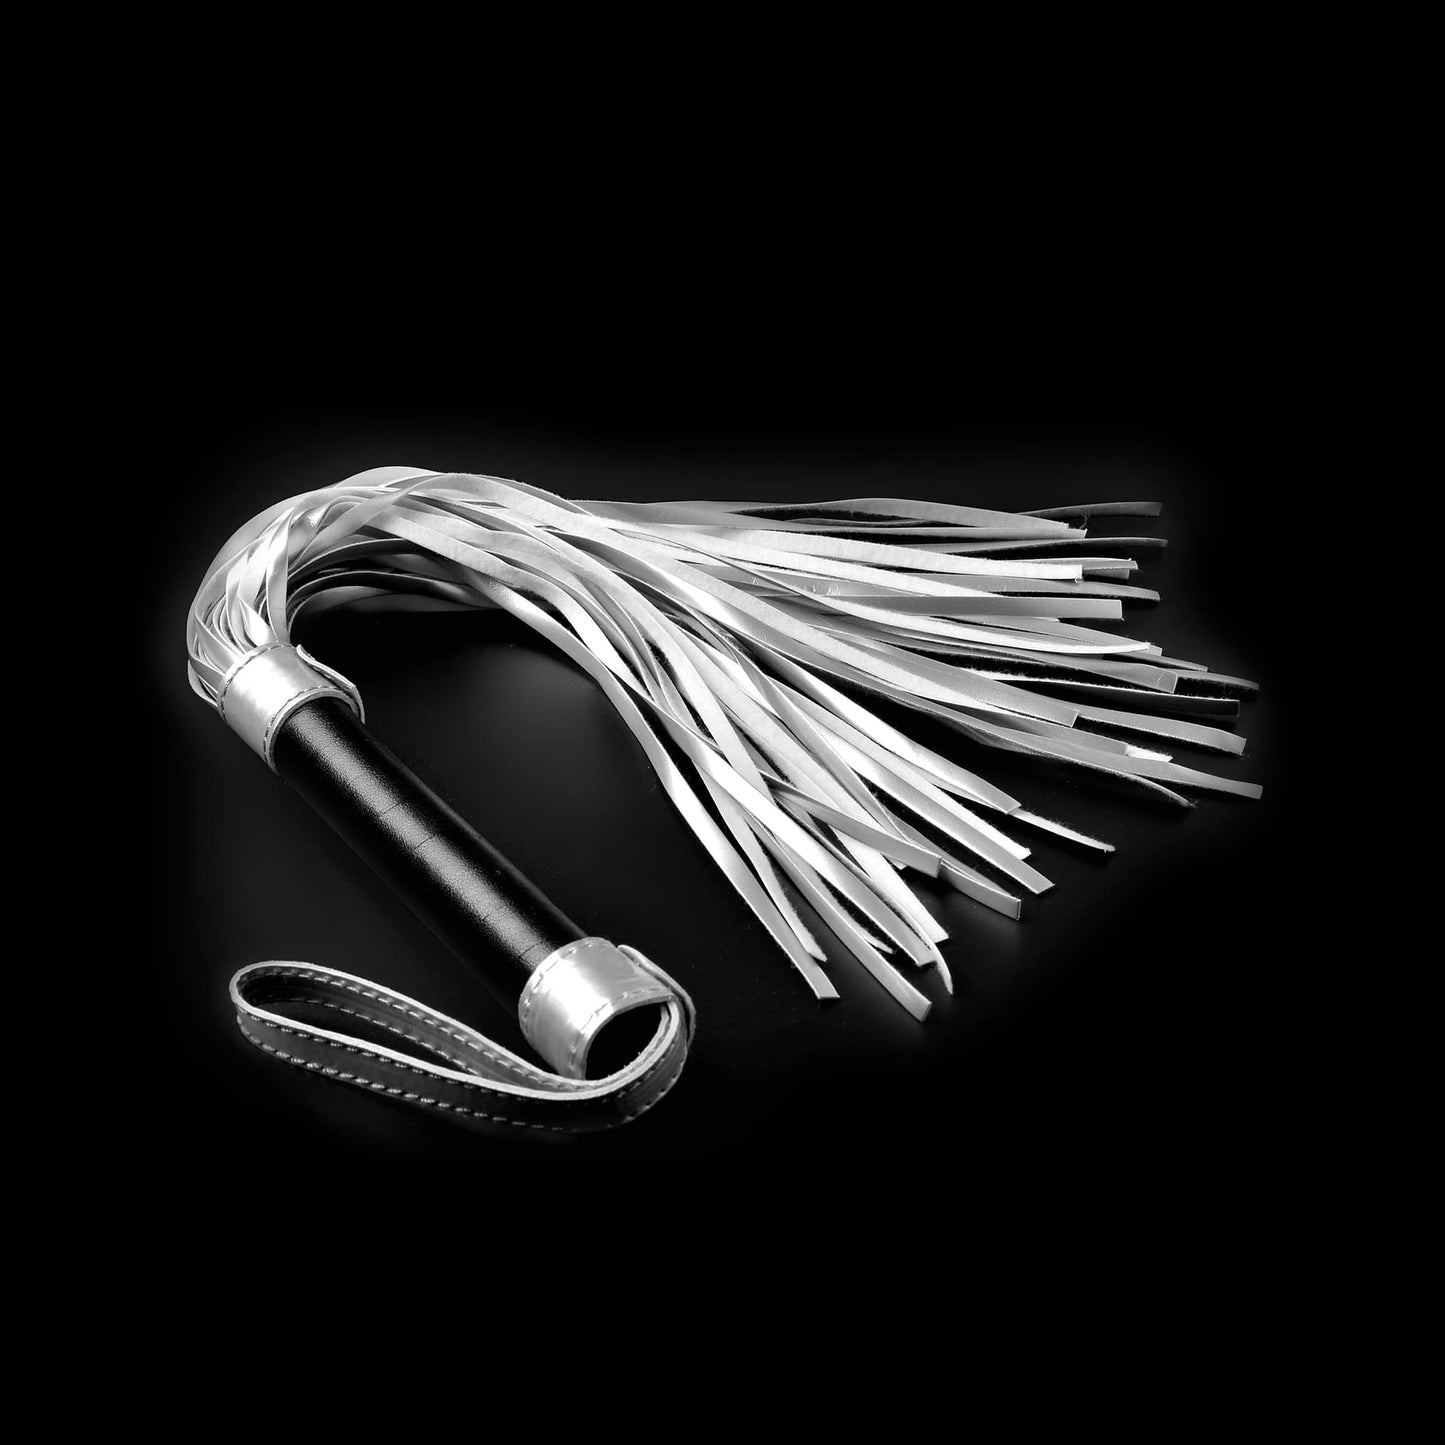 The bdsm sex whip flogger for kinky play lays flat